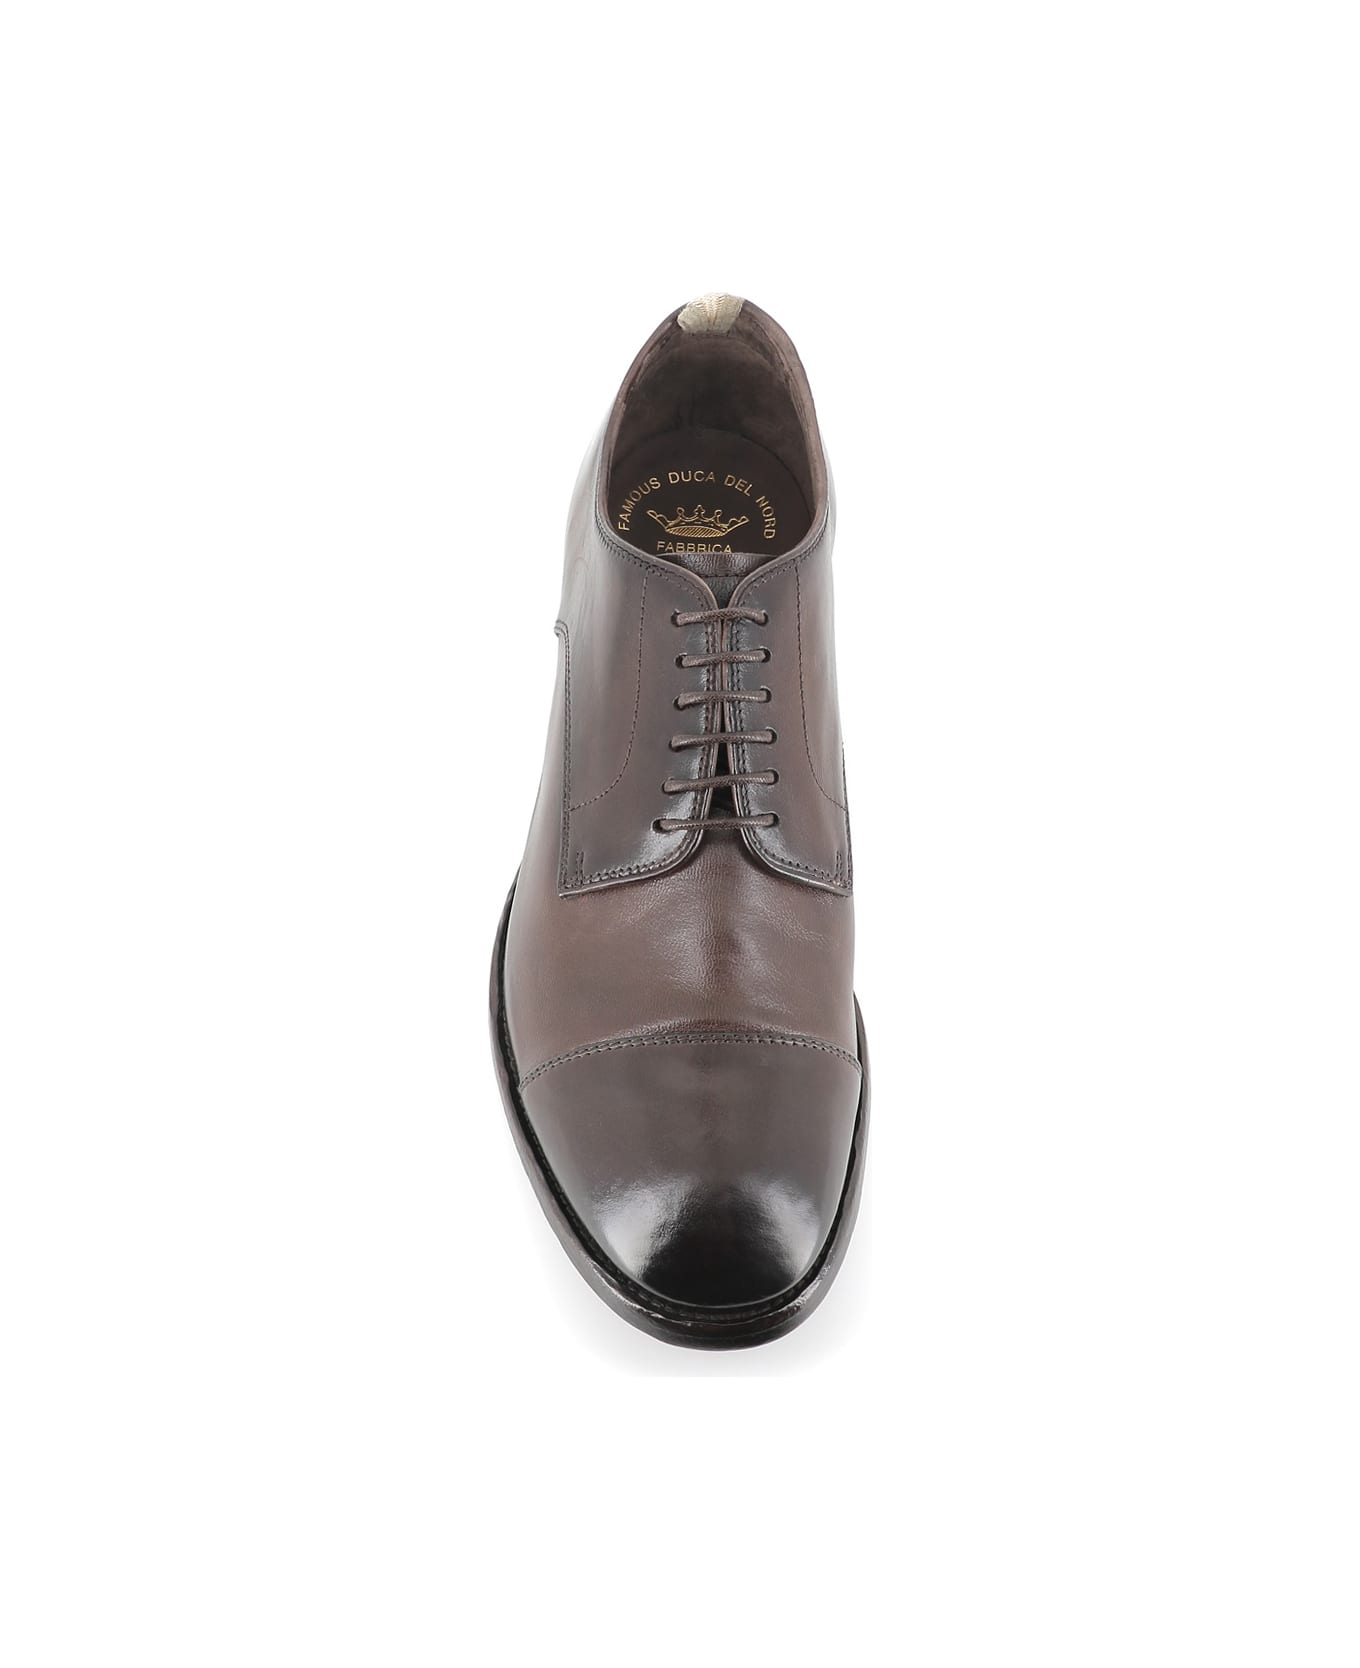 Officine Creative Derby Providence/010 - Brown